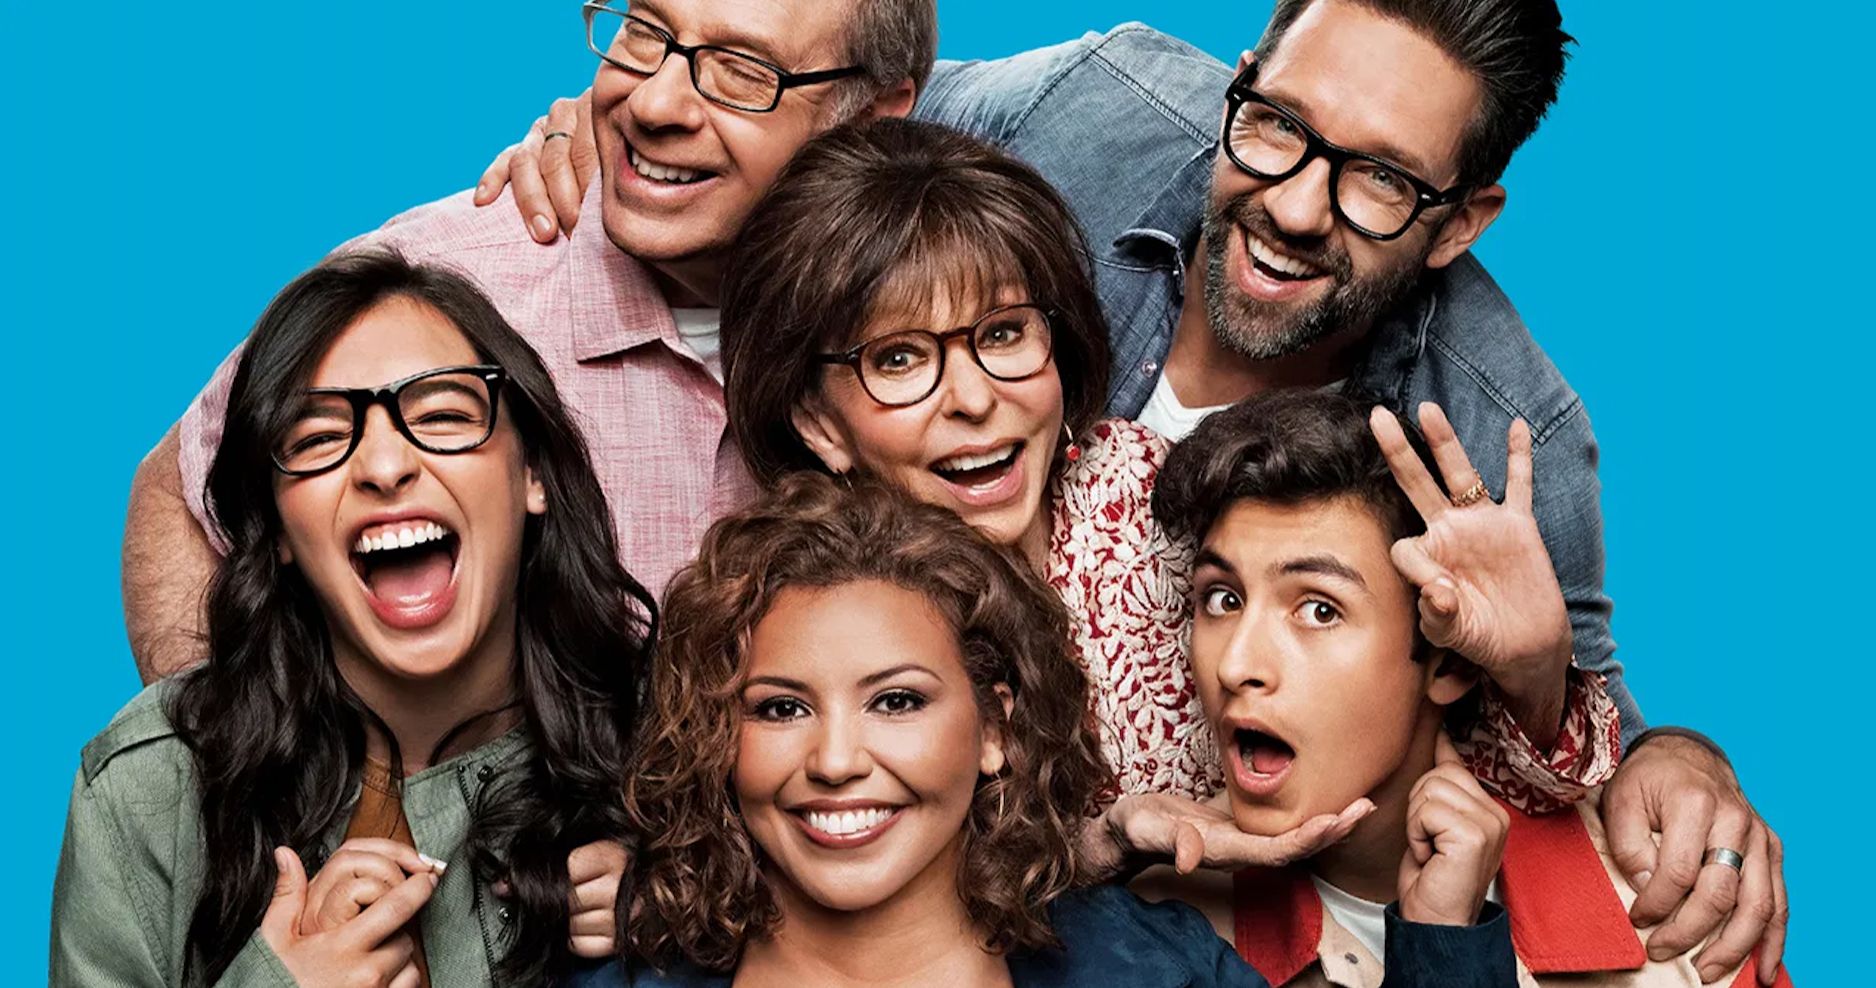 One Day at a Time Reboot Gets Canceled a Second Time, Third Home Being Shopped